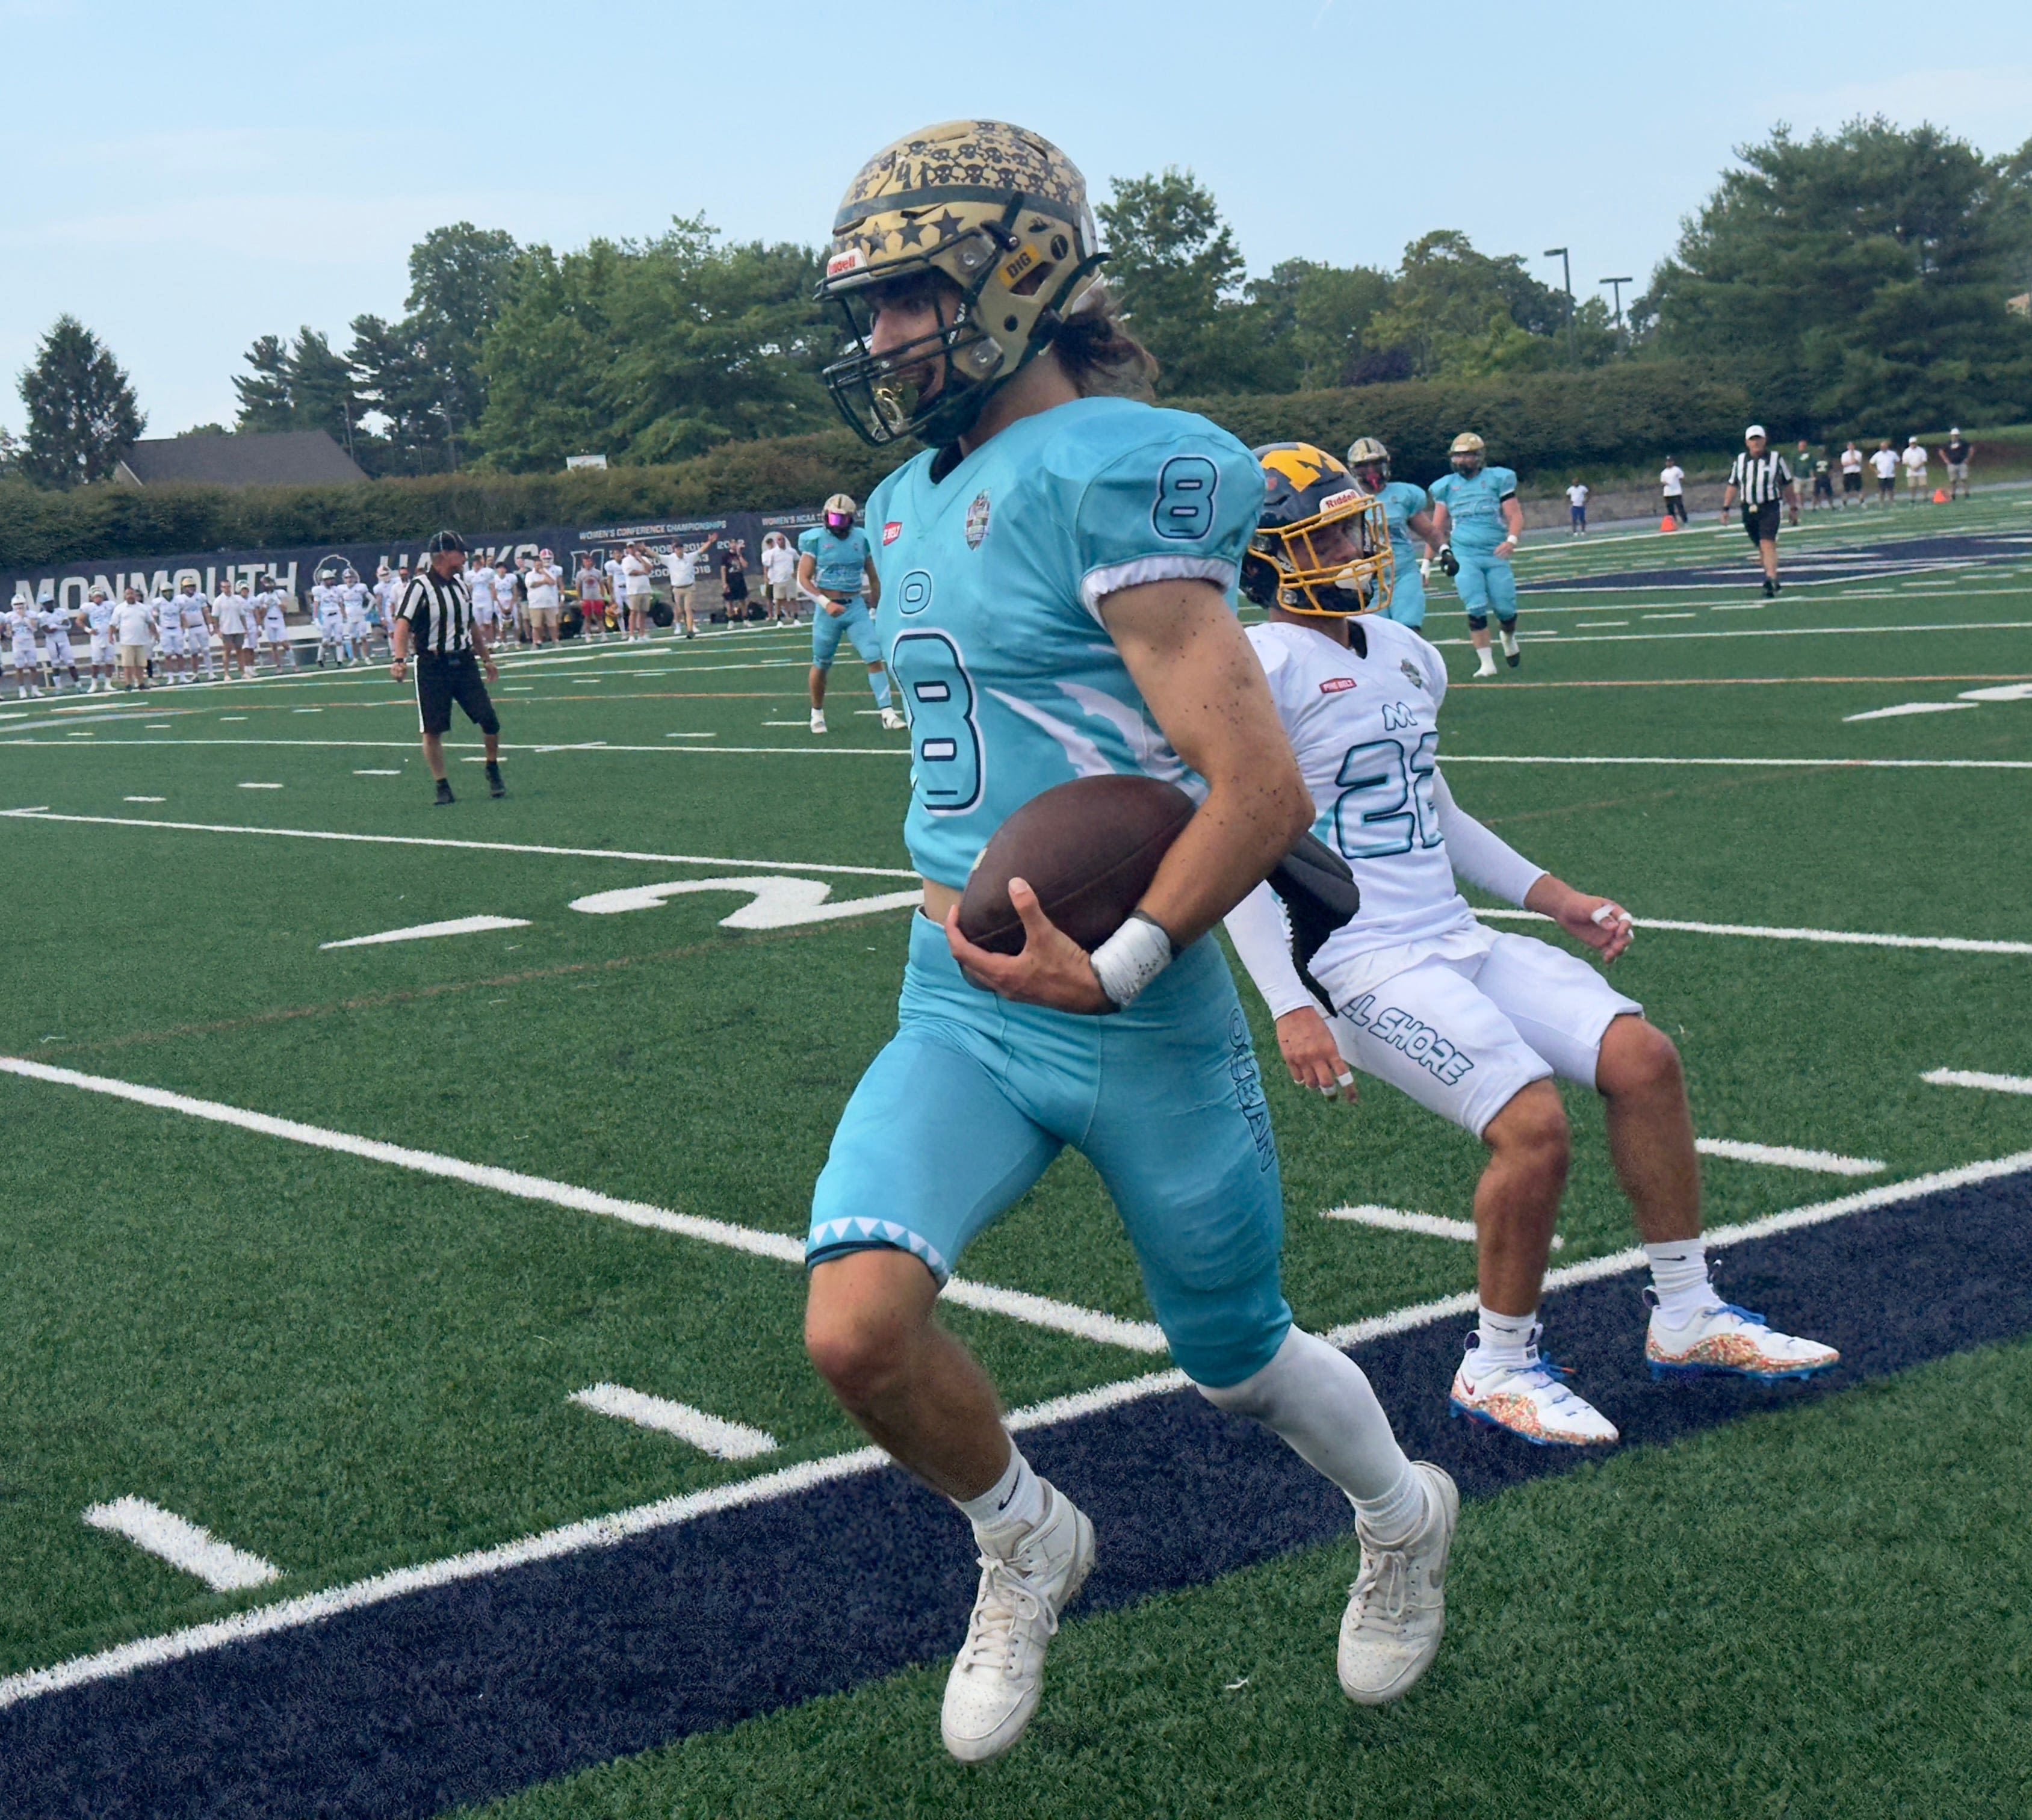 Why the All-Shore football game means everything to the players: 'Create a brotherhood'